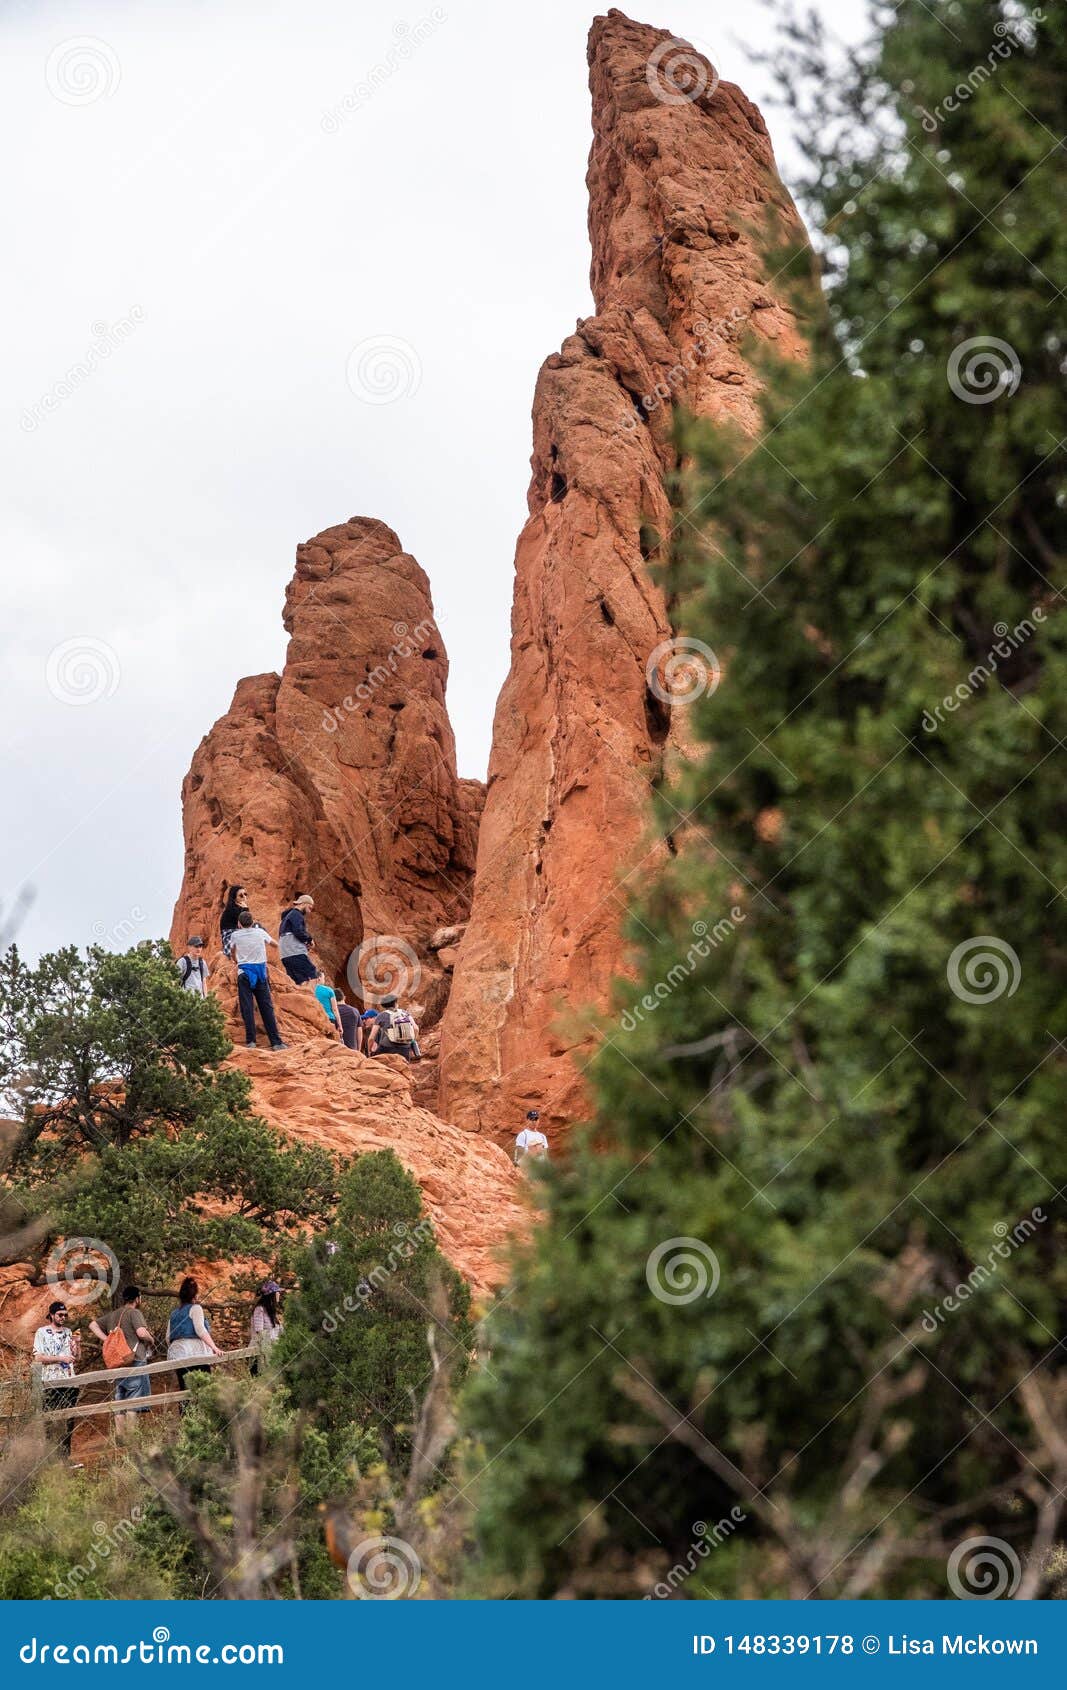 Tourists Wakling Hiking At Garden Of The Gods Colorado Springs